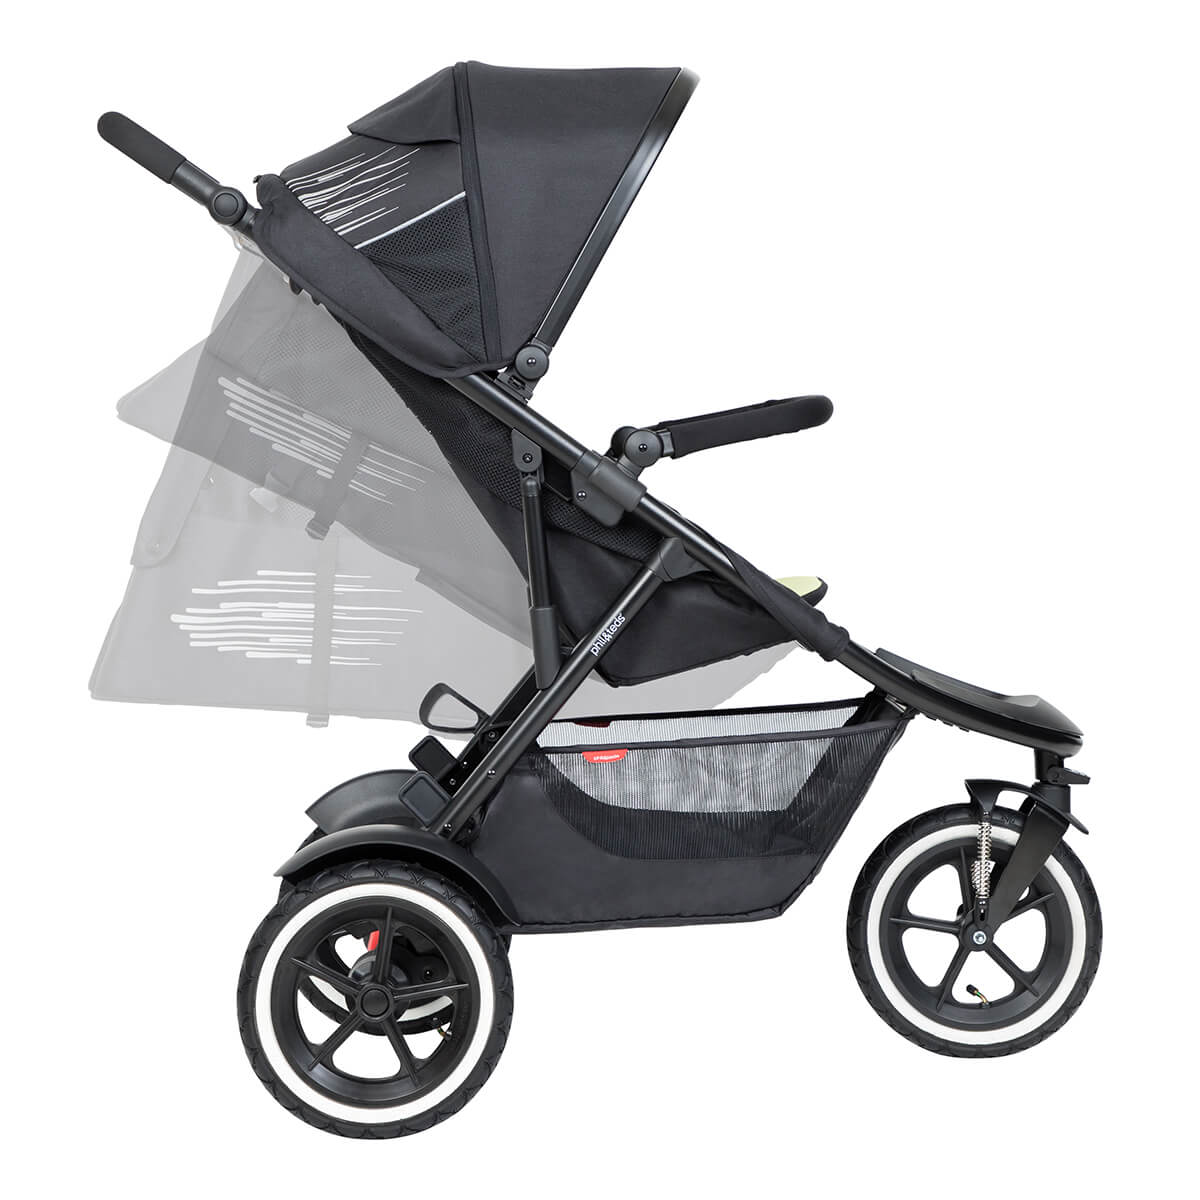 https://cdn.accentuate.io/7344766746808/19440099492024/philteds-sport-buggy-can-recline-in-multiple-angles-including-full-recline-for-newborn-baby-v1700697748165.jpg?1200x1200